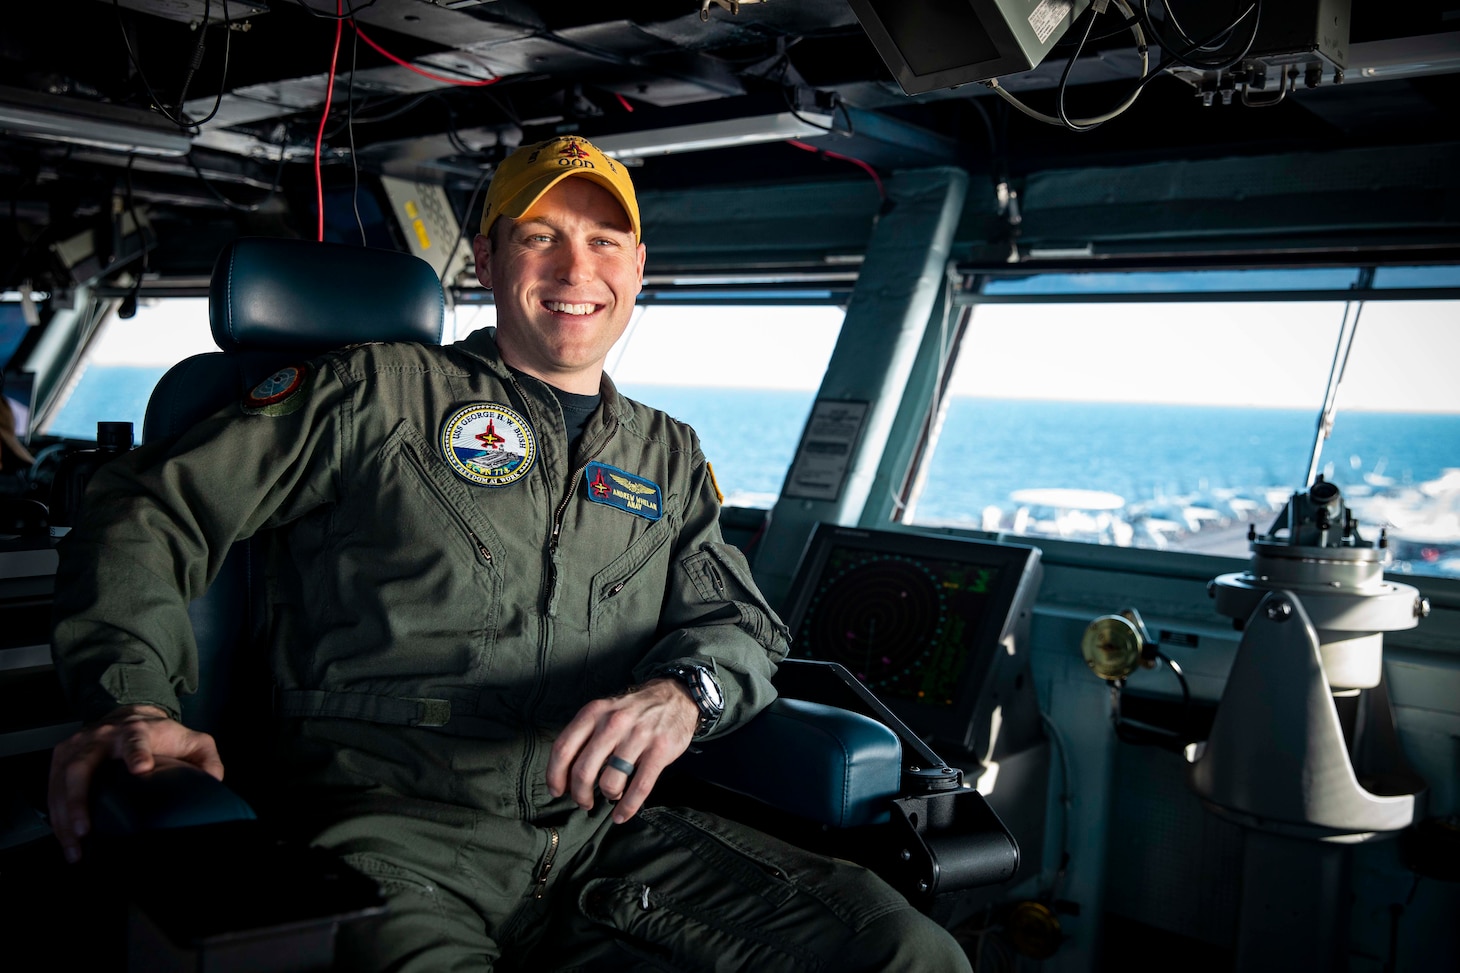 Lt. Cmdr. Andrew Whelan, assistant navigation officer aboard the Nimitz-class aircraft carrier USS George H.W. Bush (CVN 77), poses for a photo on the navigation bridge, March 6, 2023. The George H.W. Bush Carrier Strike Group is on a scheduled deployment in the U.S. Naval Forces Europe area of operations, employed by U.S. Sixth Fleet to defend U.S., allied and partner interests.